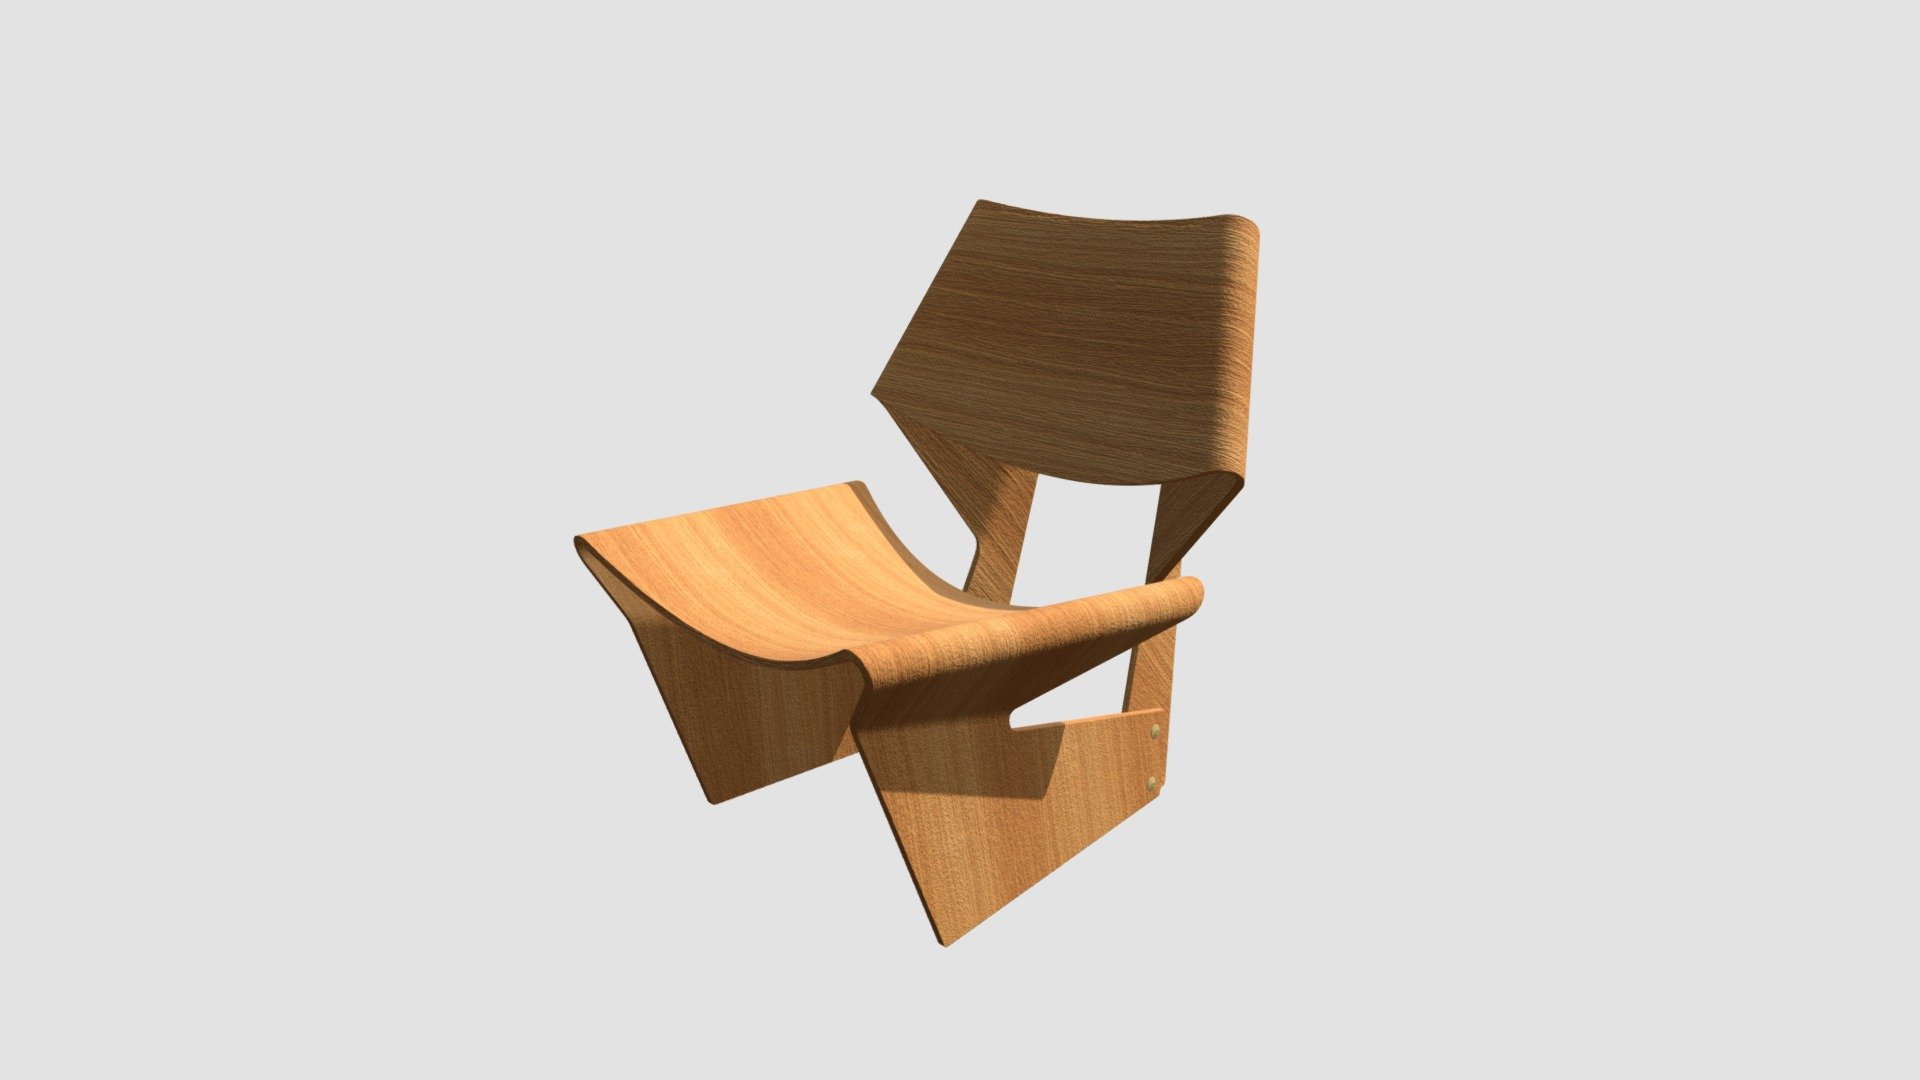 Highly detailed 3d model of chair with all textures, shaders and materials. It is ready to use, just put it into your scene 3d model